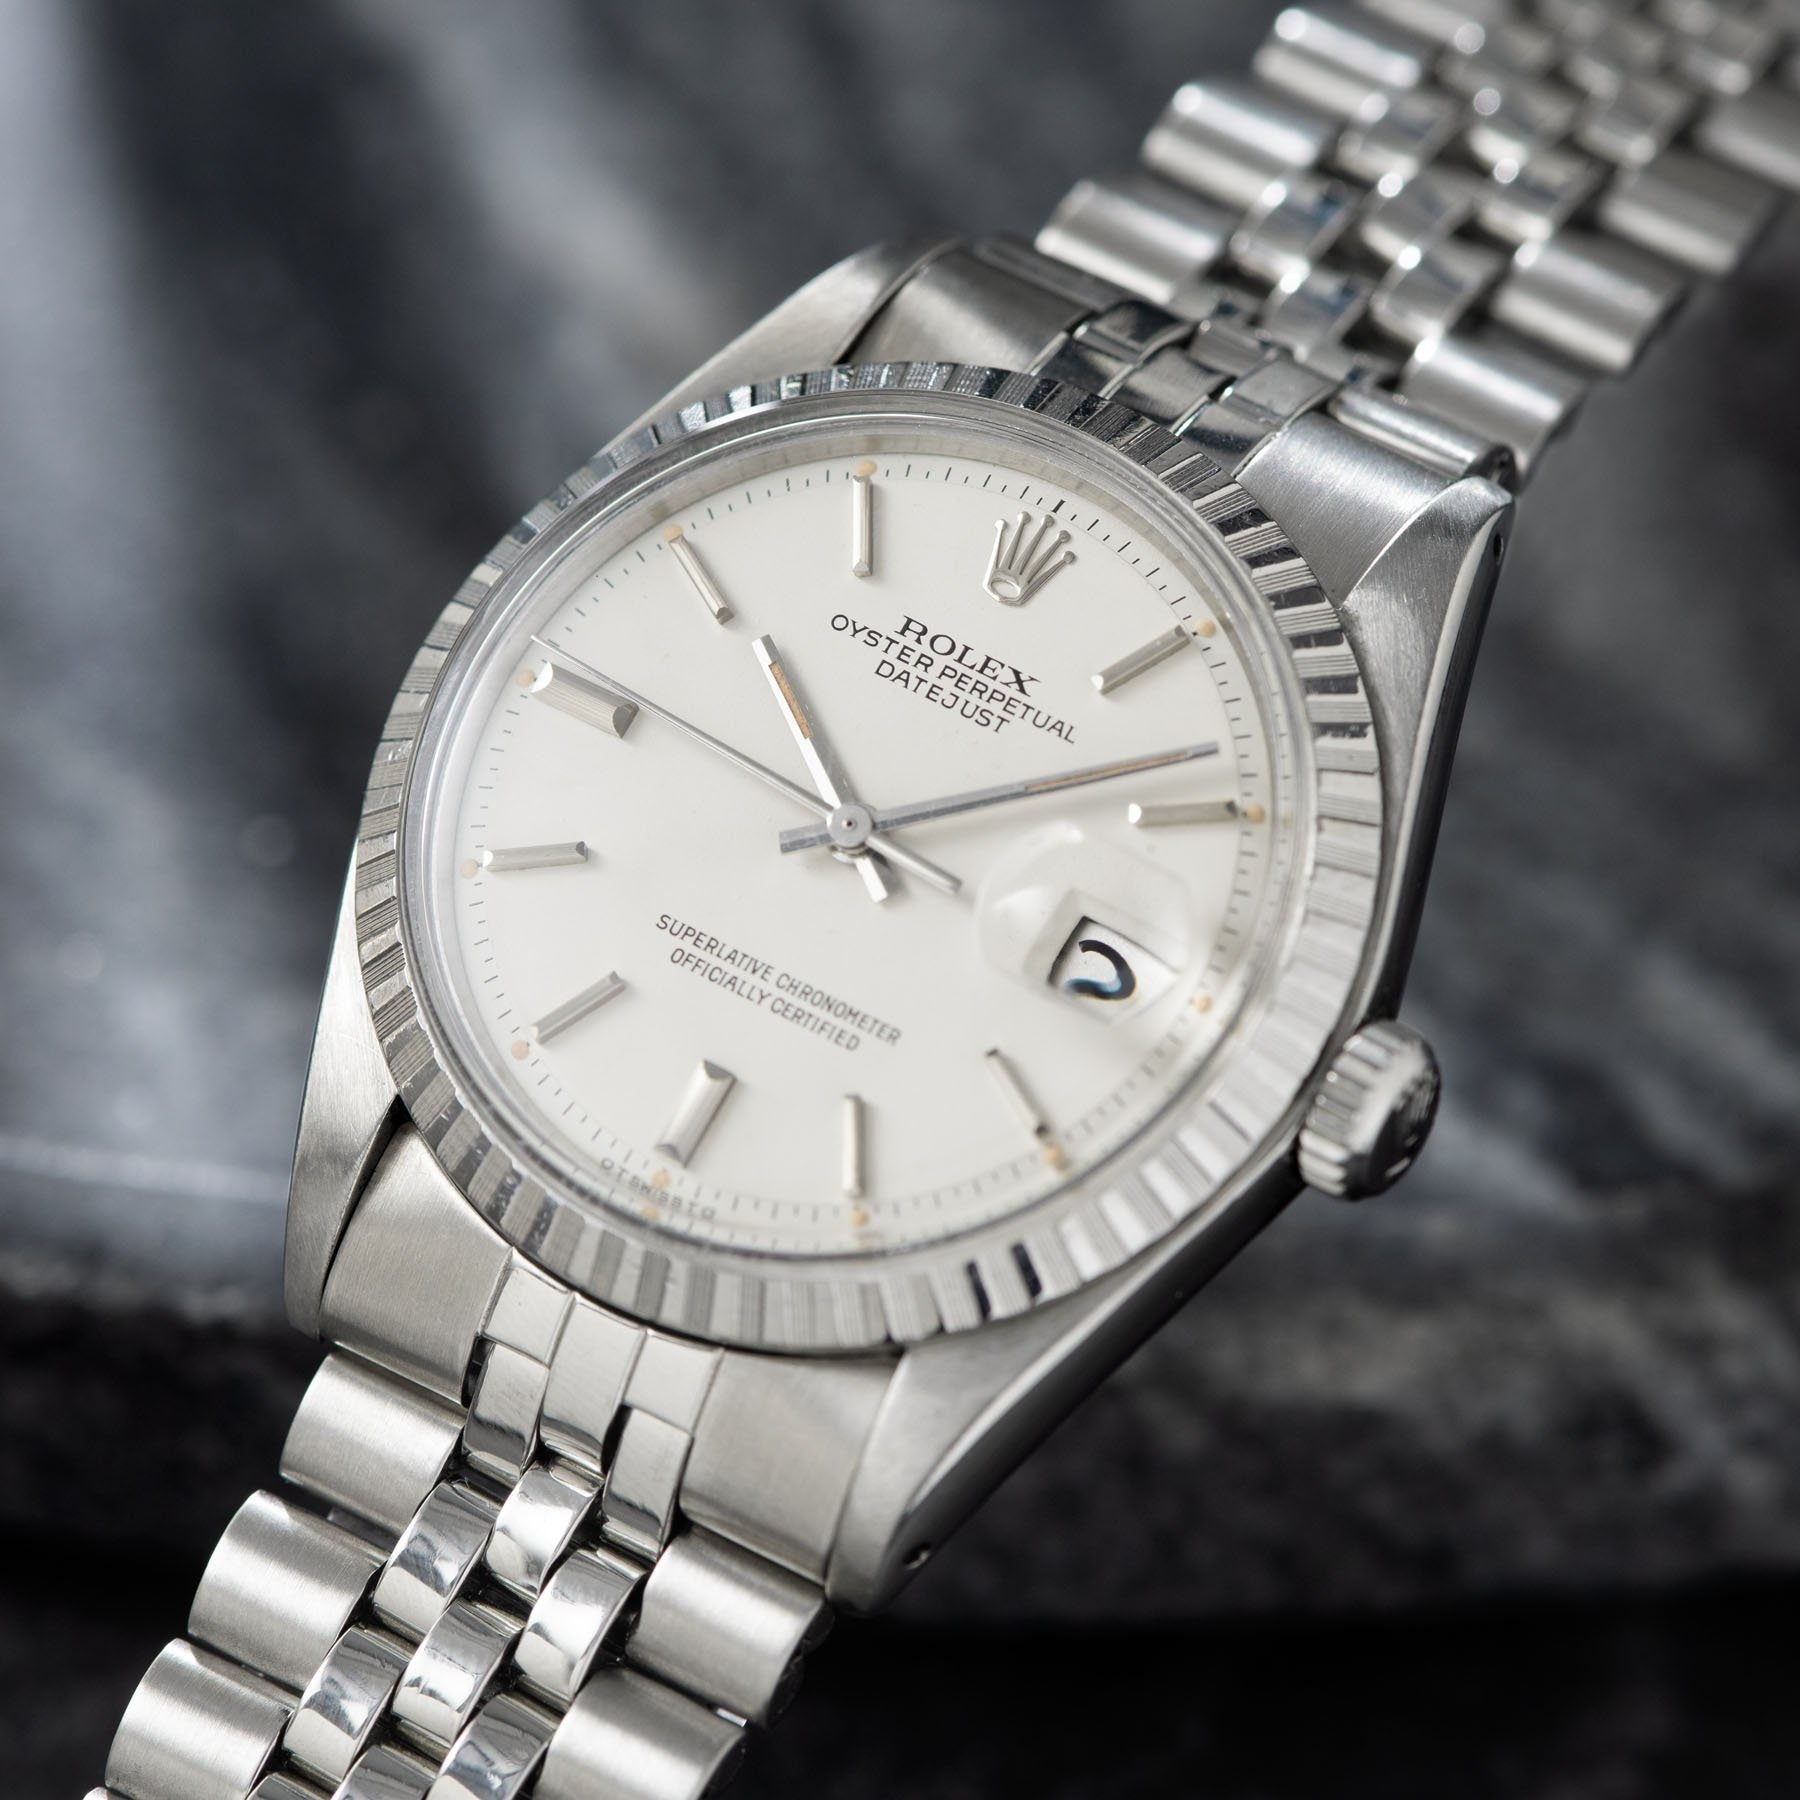 Rolex Datejust White Sigma Dial 1603 dating to 1978